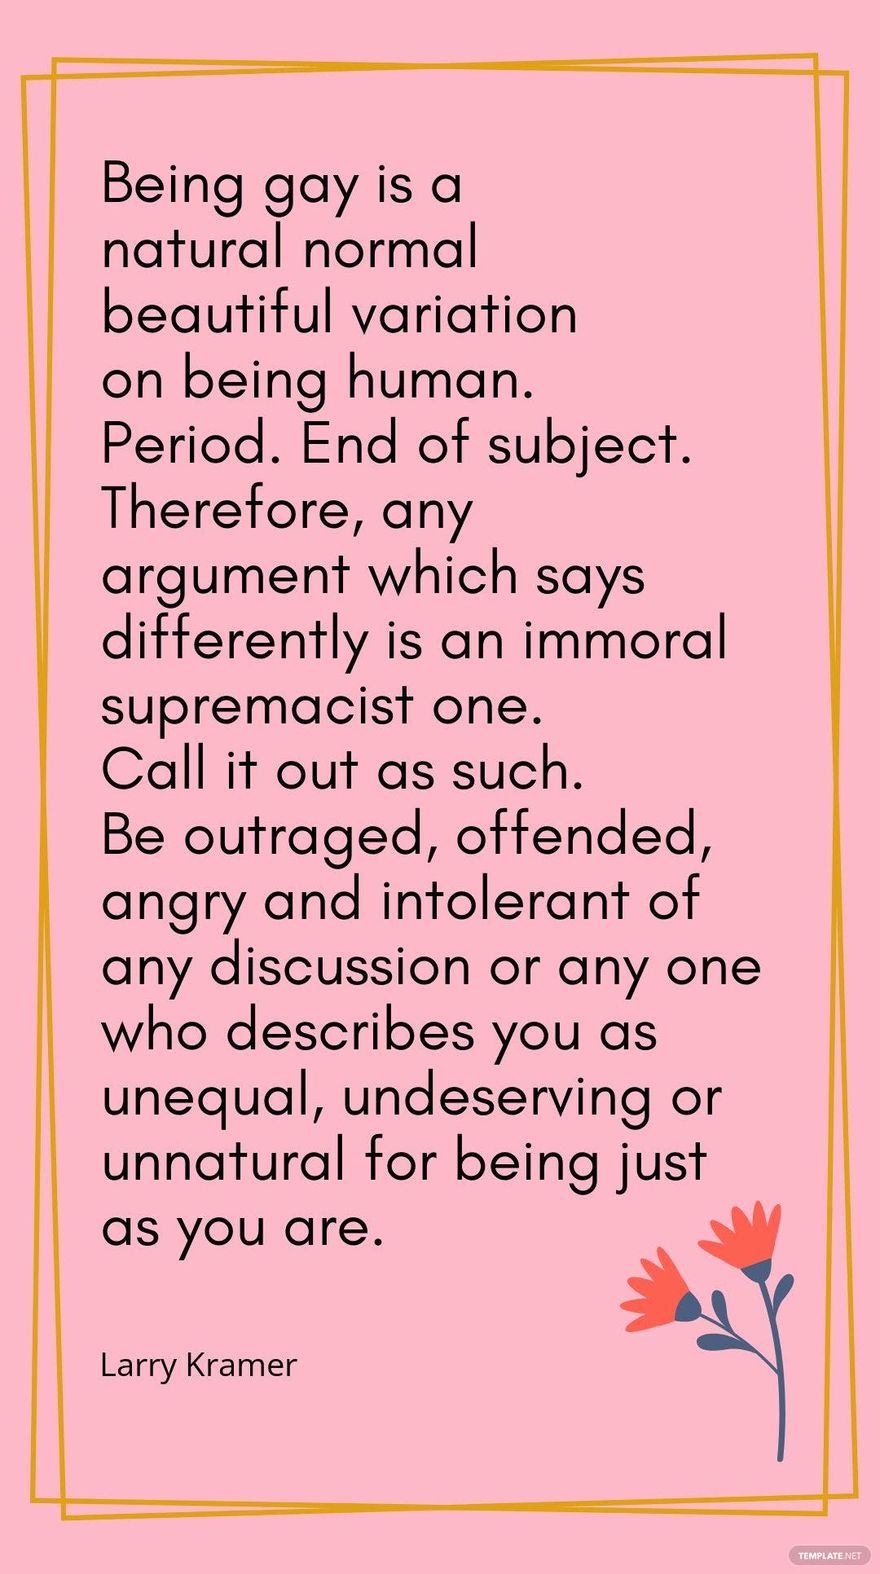 Free Larry Kramer - Being gay is a natural normal beautiful variation on being human. Period. End of subject. Therefore, any argument which says differently is an immoral supremacist one. Call it out as su